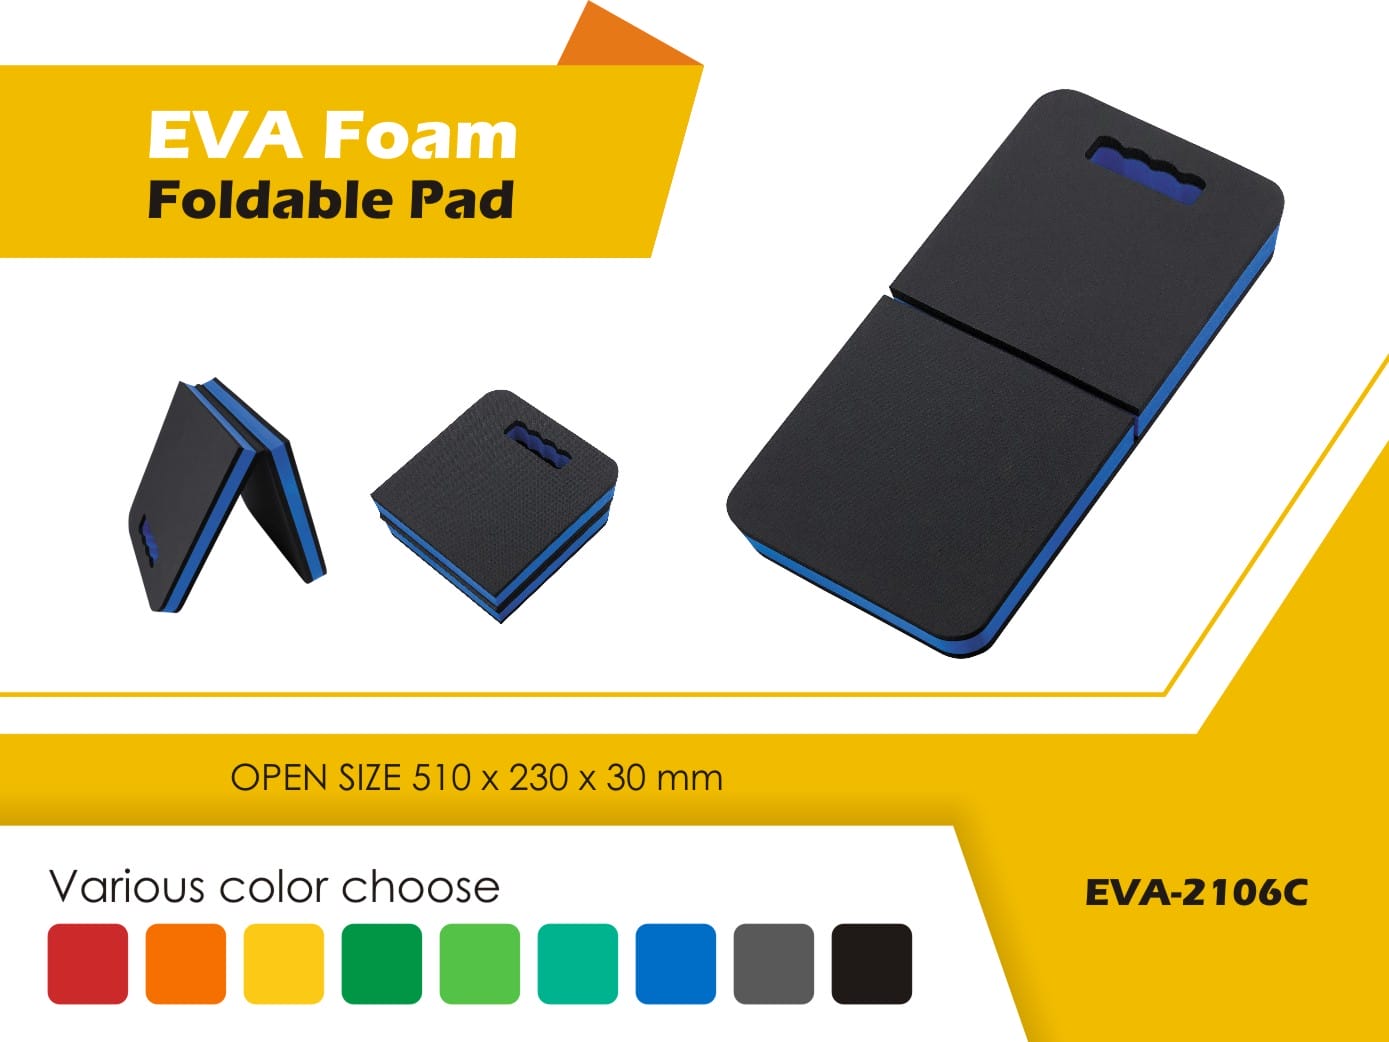 2 in 1 Foldable Pad